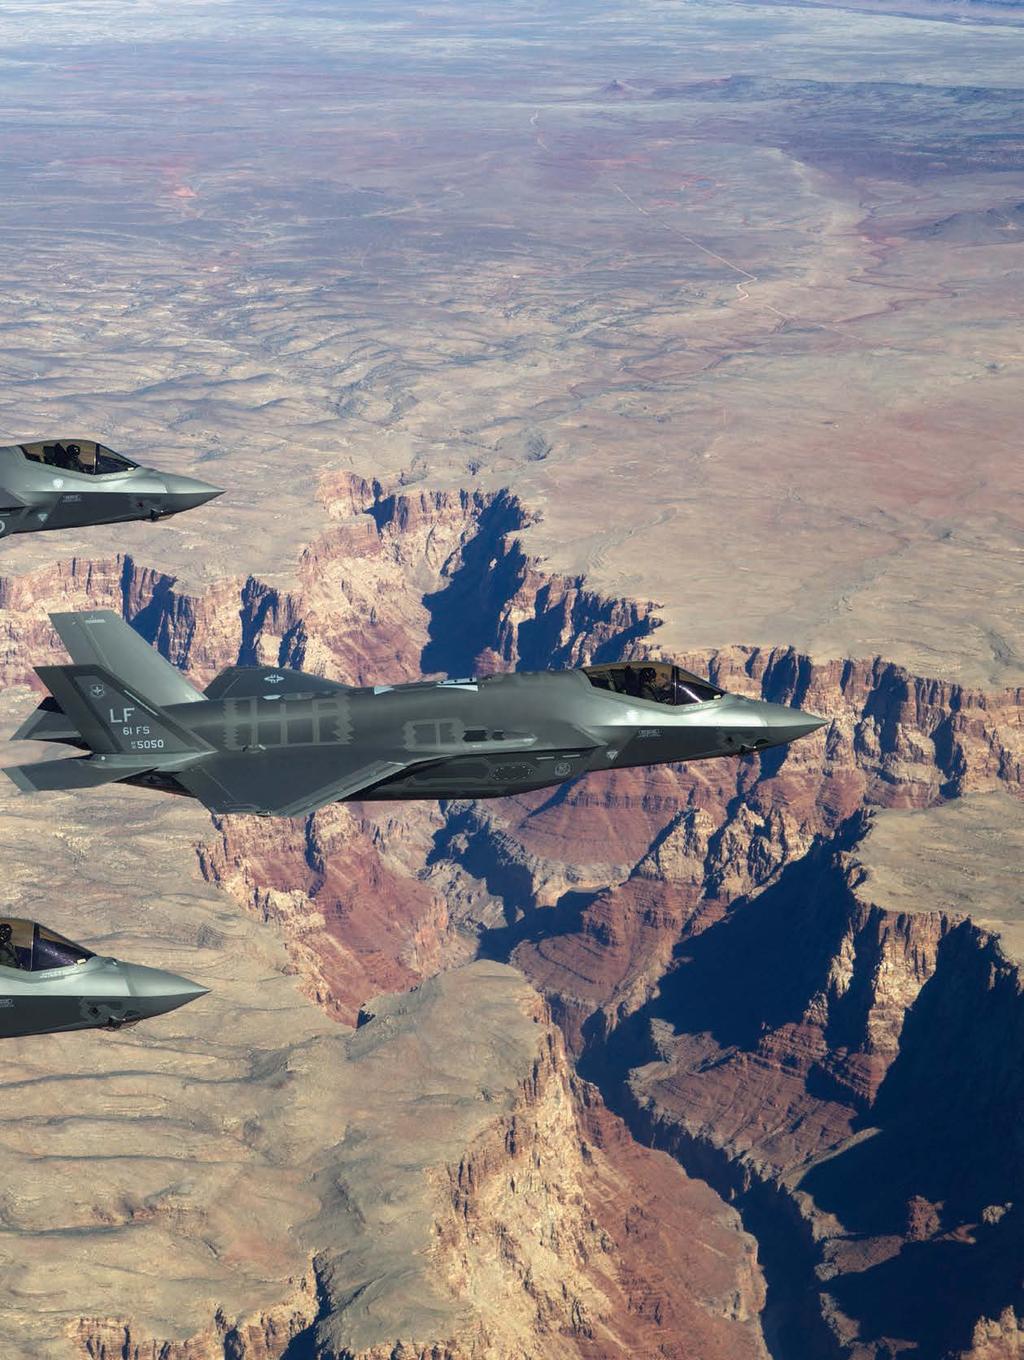 Photography by Jim Haseltine Text by Gideon Grudo The Arizona skies, long home to F-16s, now also host USAF F-35A pilots and those from other nations.